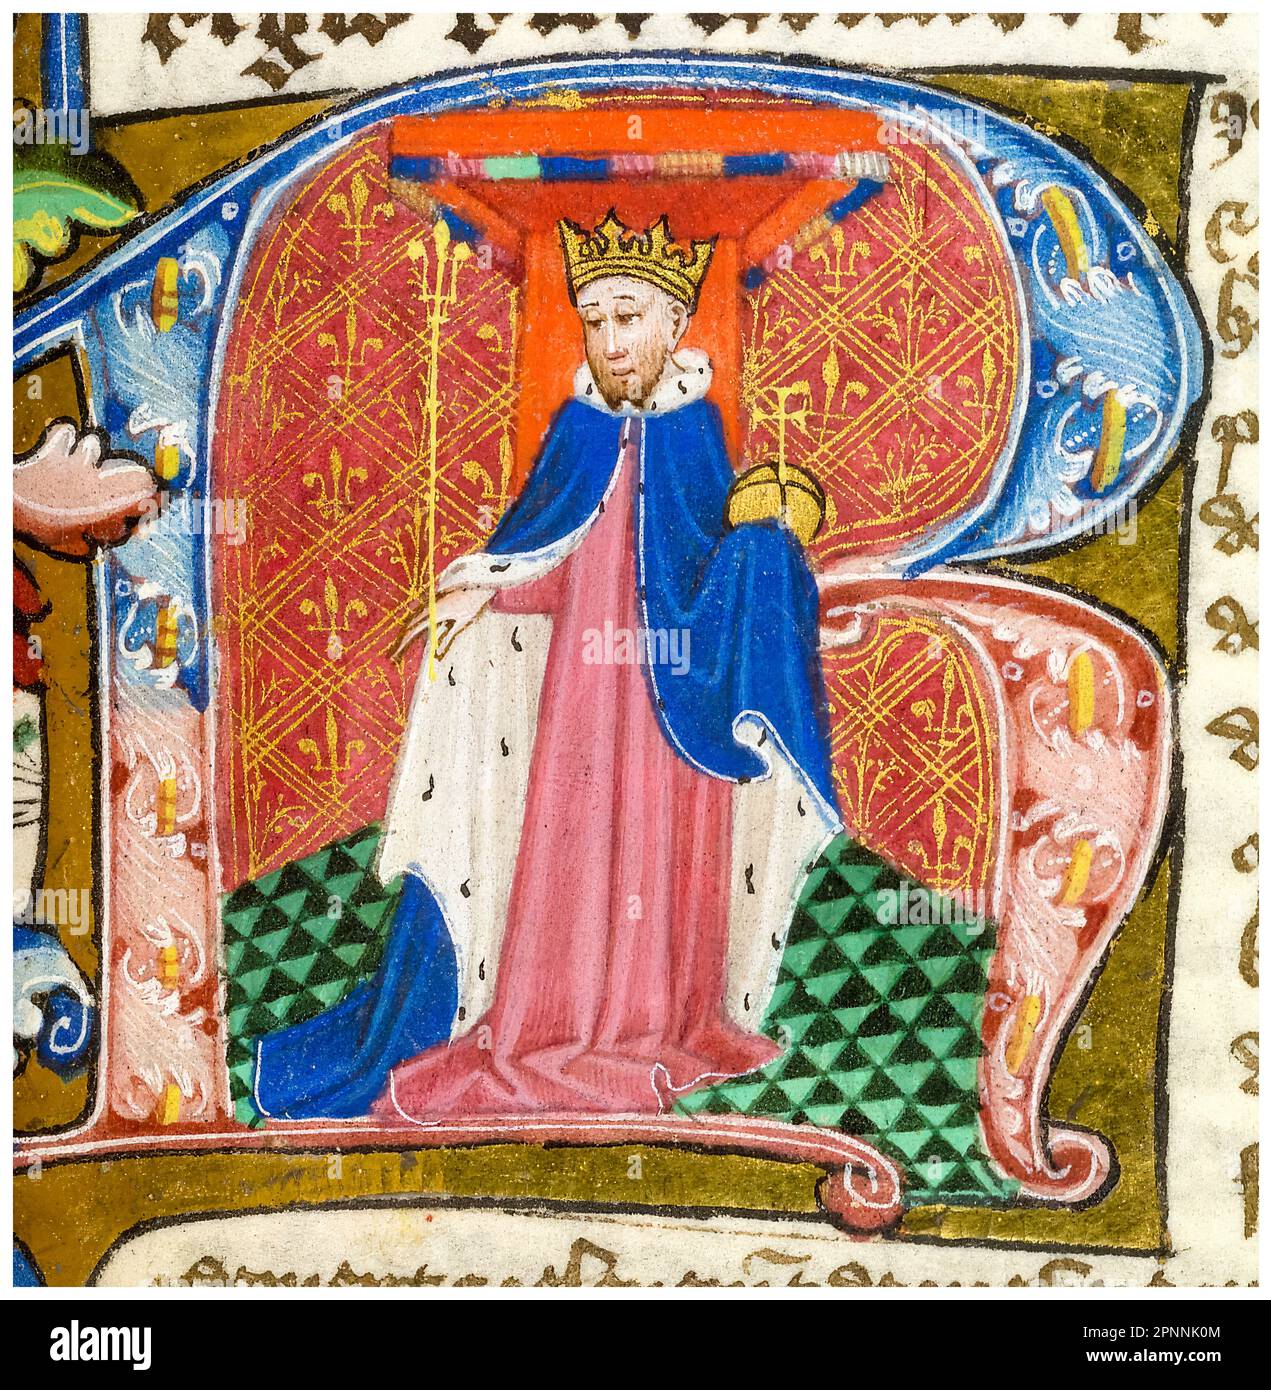 Richard II of England (1367-1400) also known as Richard of Bordeaux, King of England (1377-1399), wearing a crown, ermine robe and holding an orb and sceptre illustrated in an historiated initial R, miniature illuminated manuscript portrait painting, 1451-1480 Stock Photo